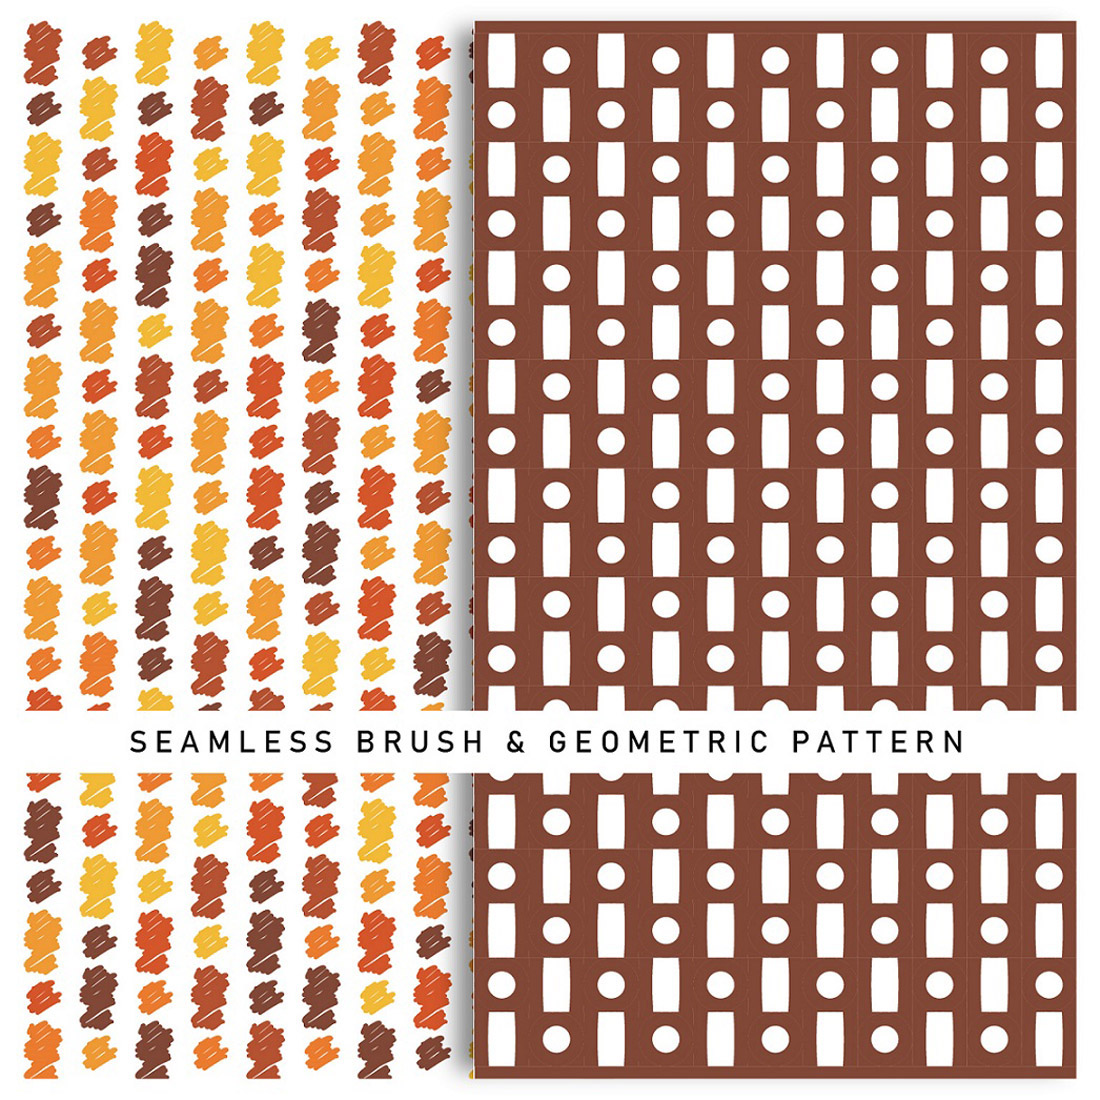 Two Different Pattern (Geometric & Seamless Brush Pattern) in One Bundle cover image.